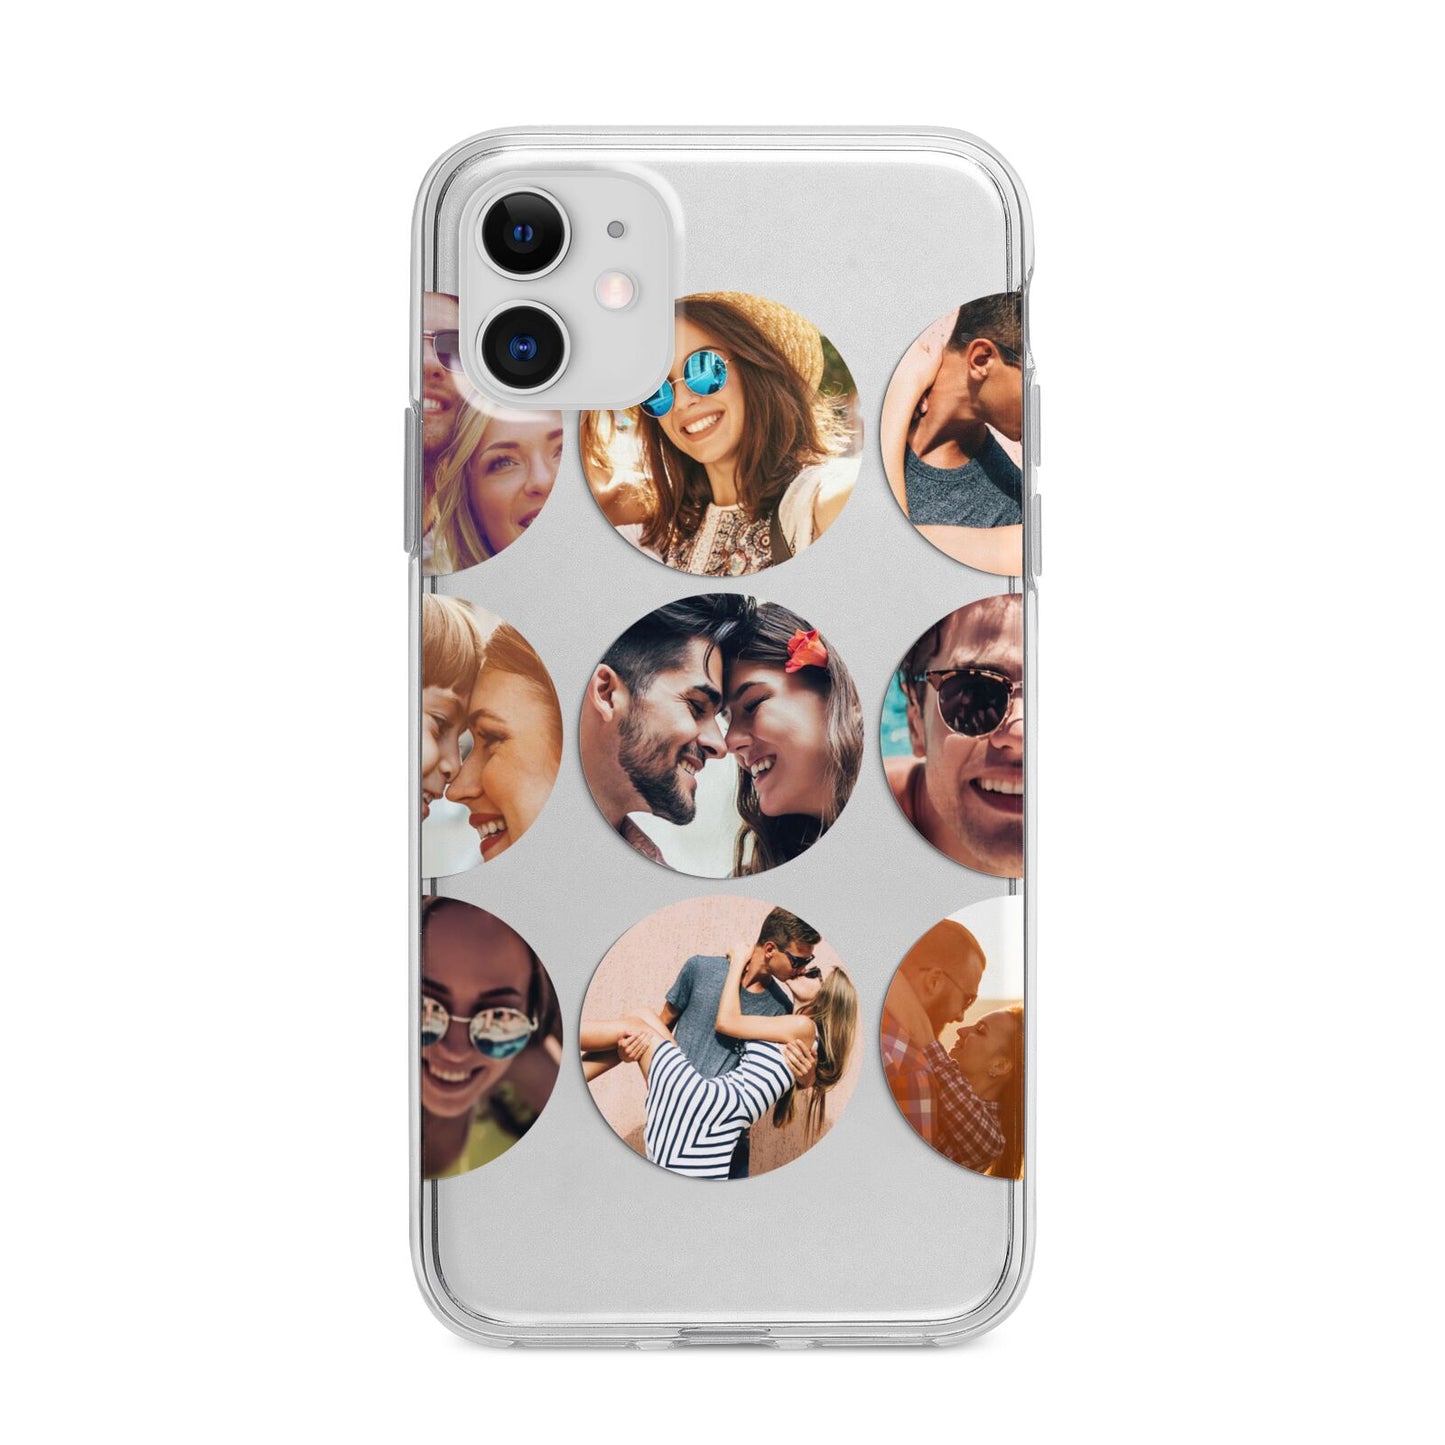 Circular Photo Montage Upload Apple iPhone 11 in White with Bumper Case